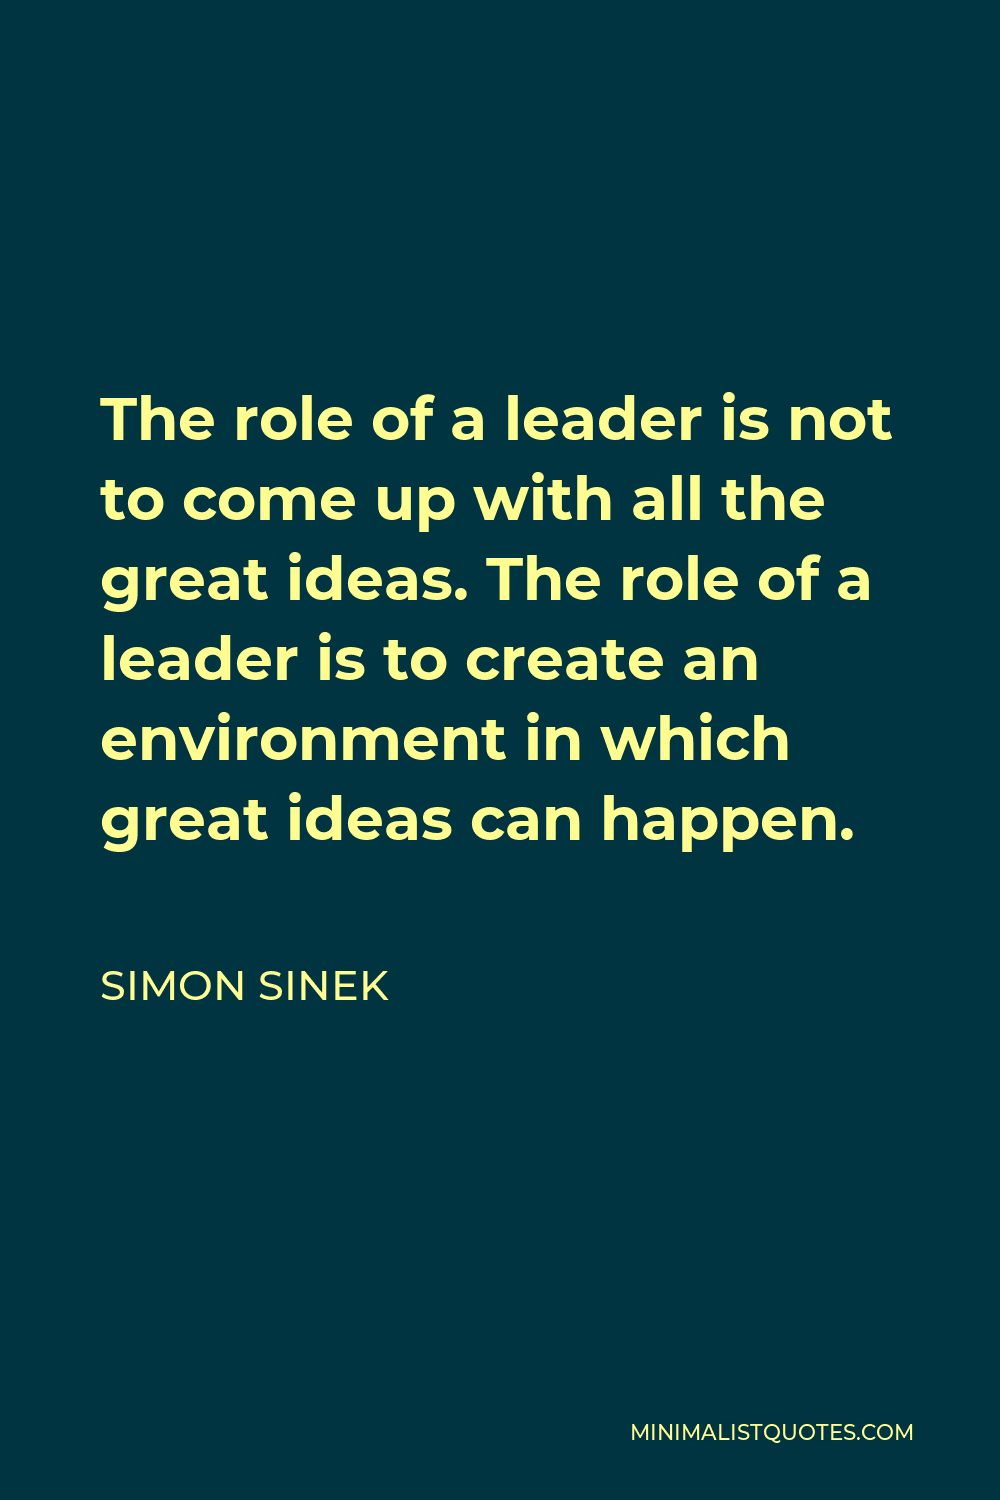 Simon Sinek Quote - The role of a leader is not to come up with all the great ideas. The role of a leader is to create an environment in which great ideas can happen.